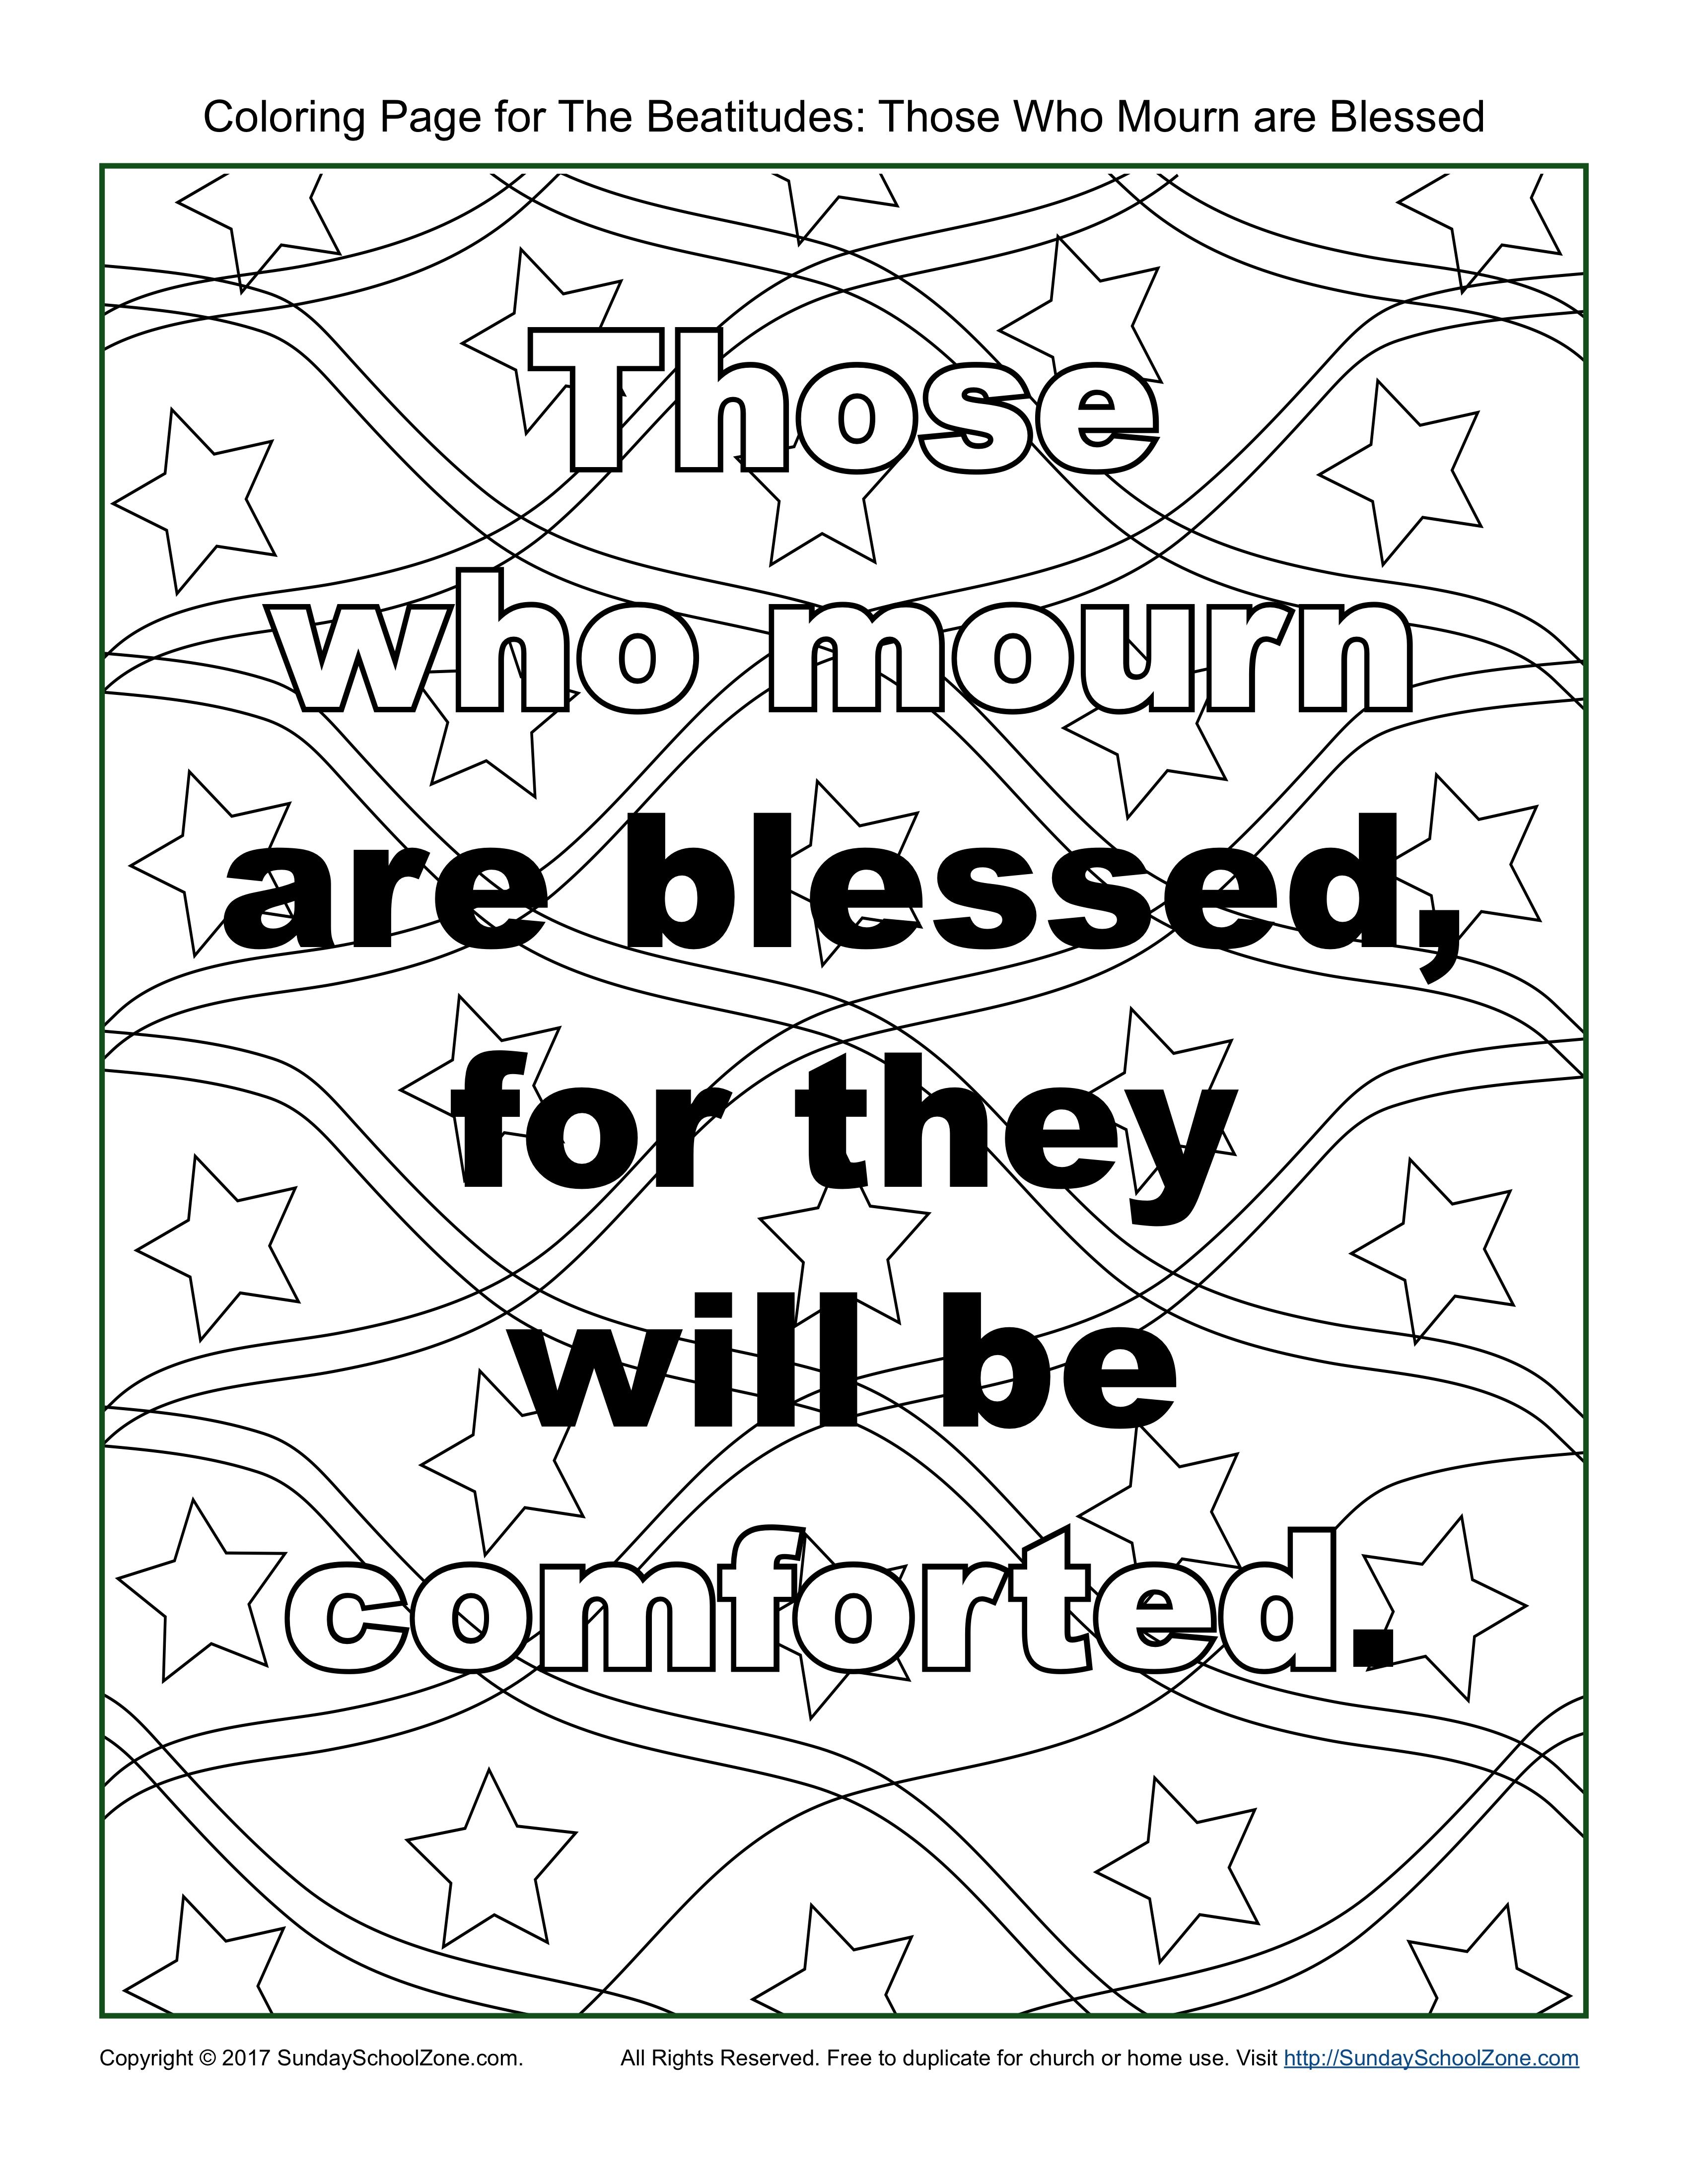 Those who mourn beatitudes coloring page sunday school coloring sheets beatitudes heart coloring pages